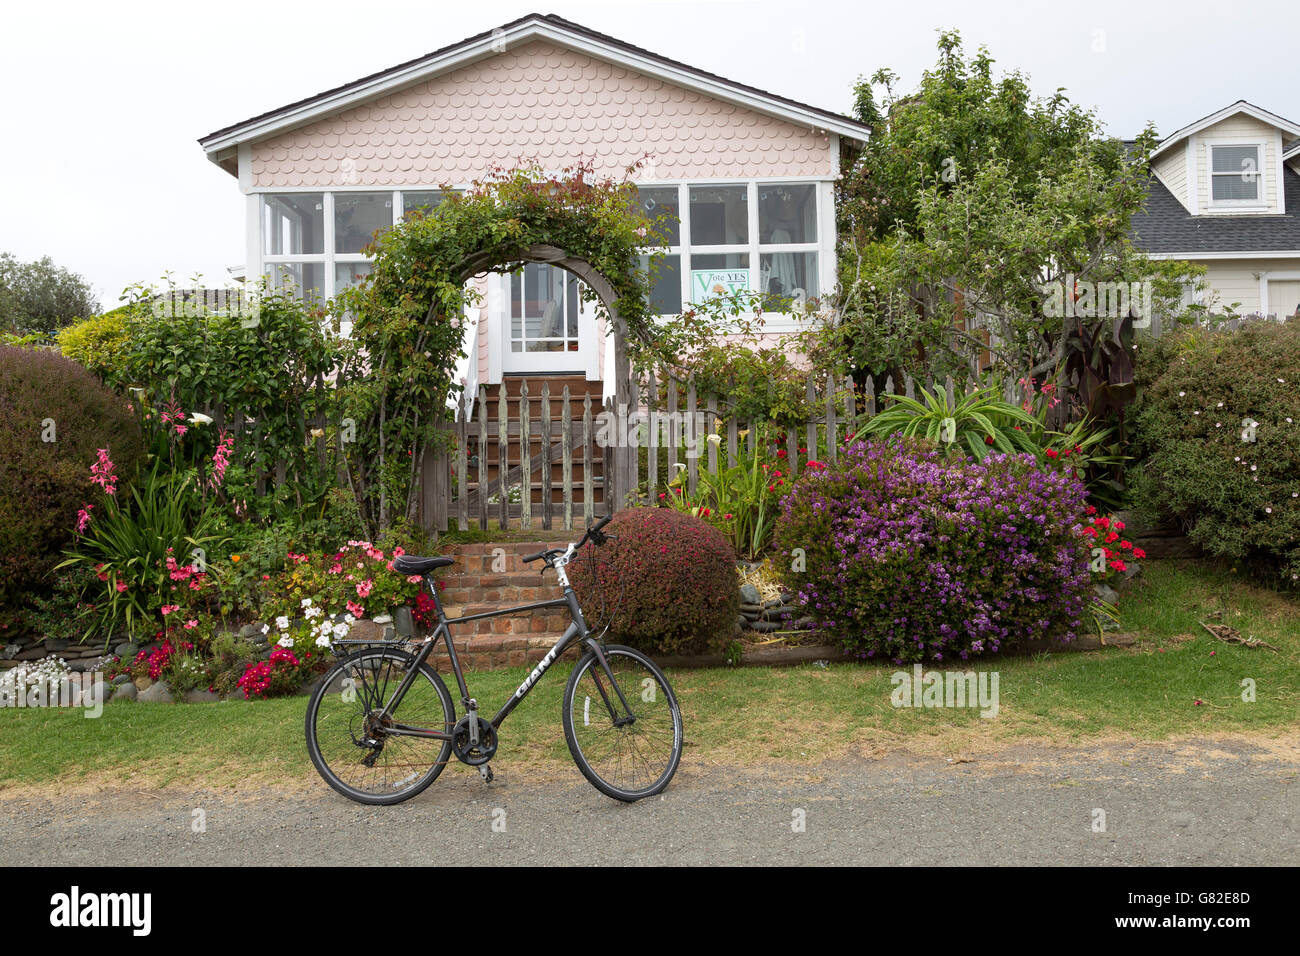 gardens, flowers, picket fence and bike in front of small house in Mendocino, California. Stock Photo